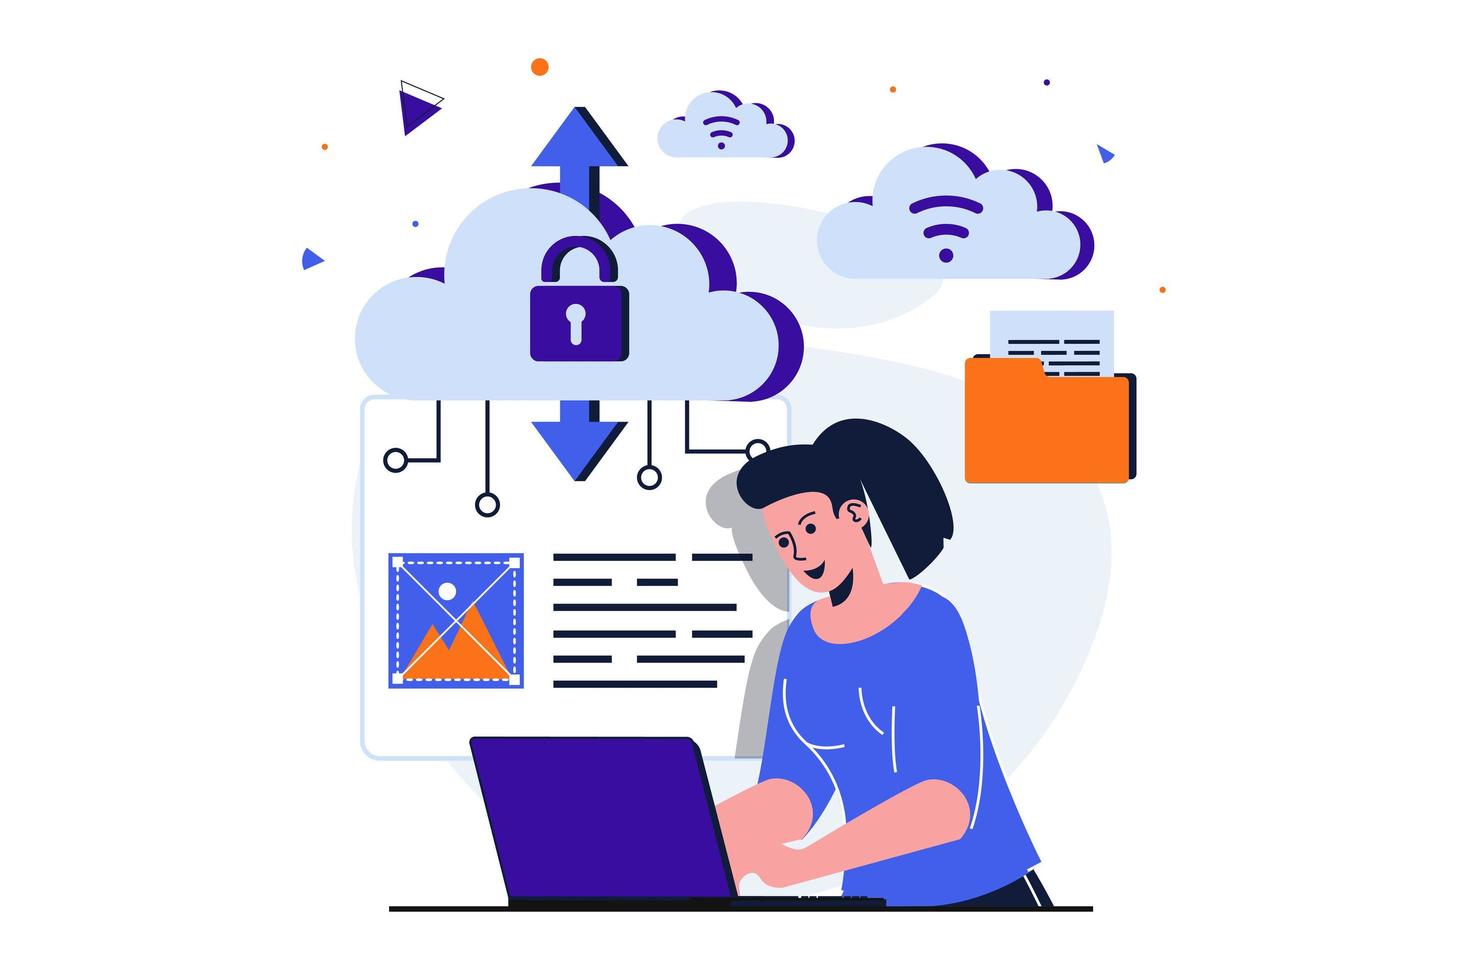 Cloud computing modern flat concept for web banner design. Woman working on laptop, processing files and images online and using cloud technologies. Vector illustration with isolated people scene